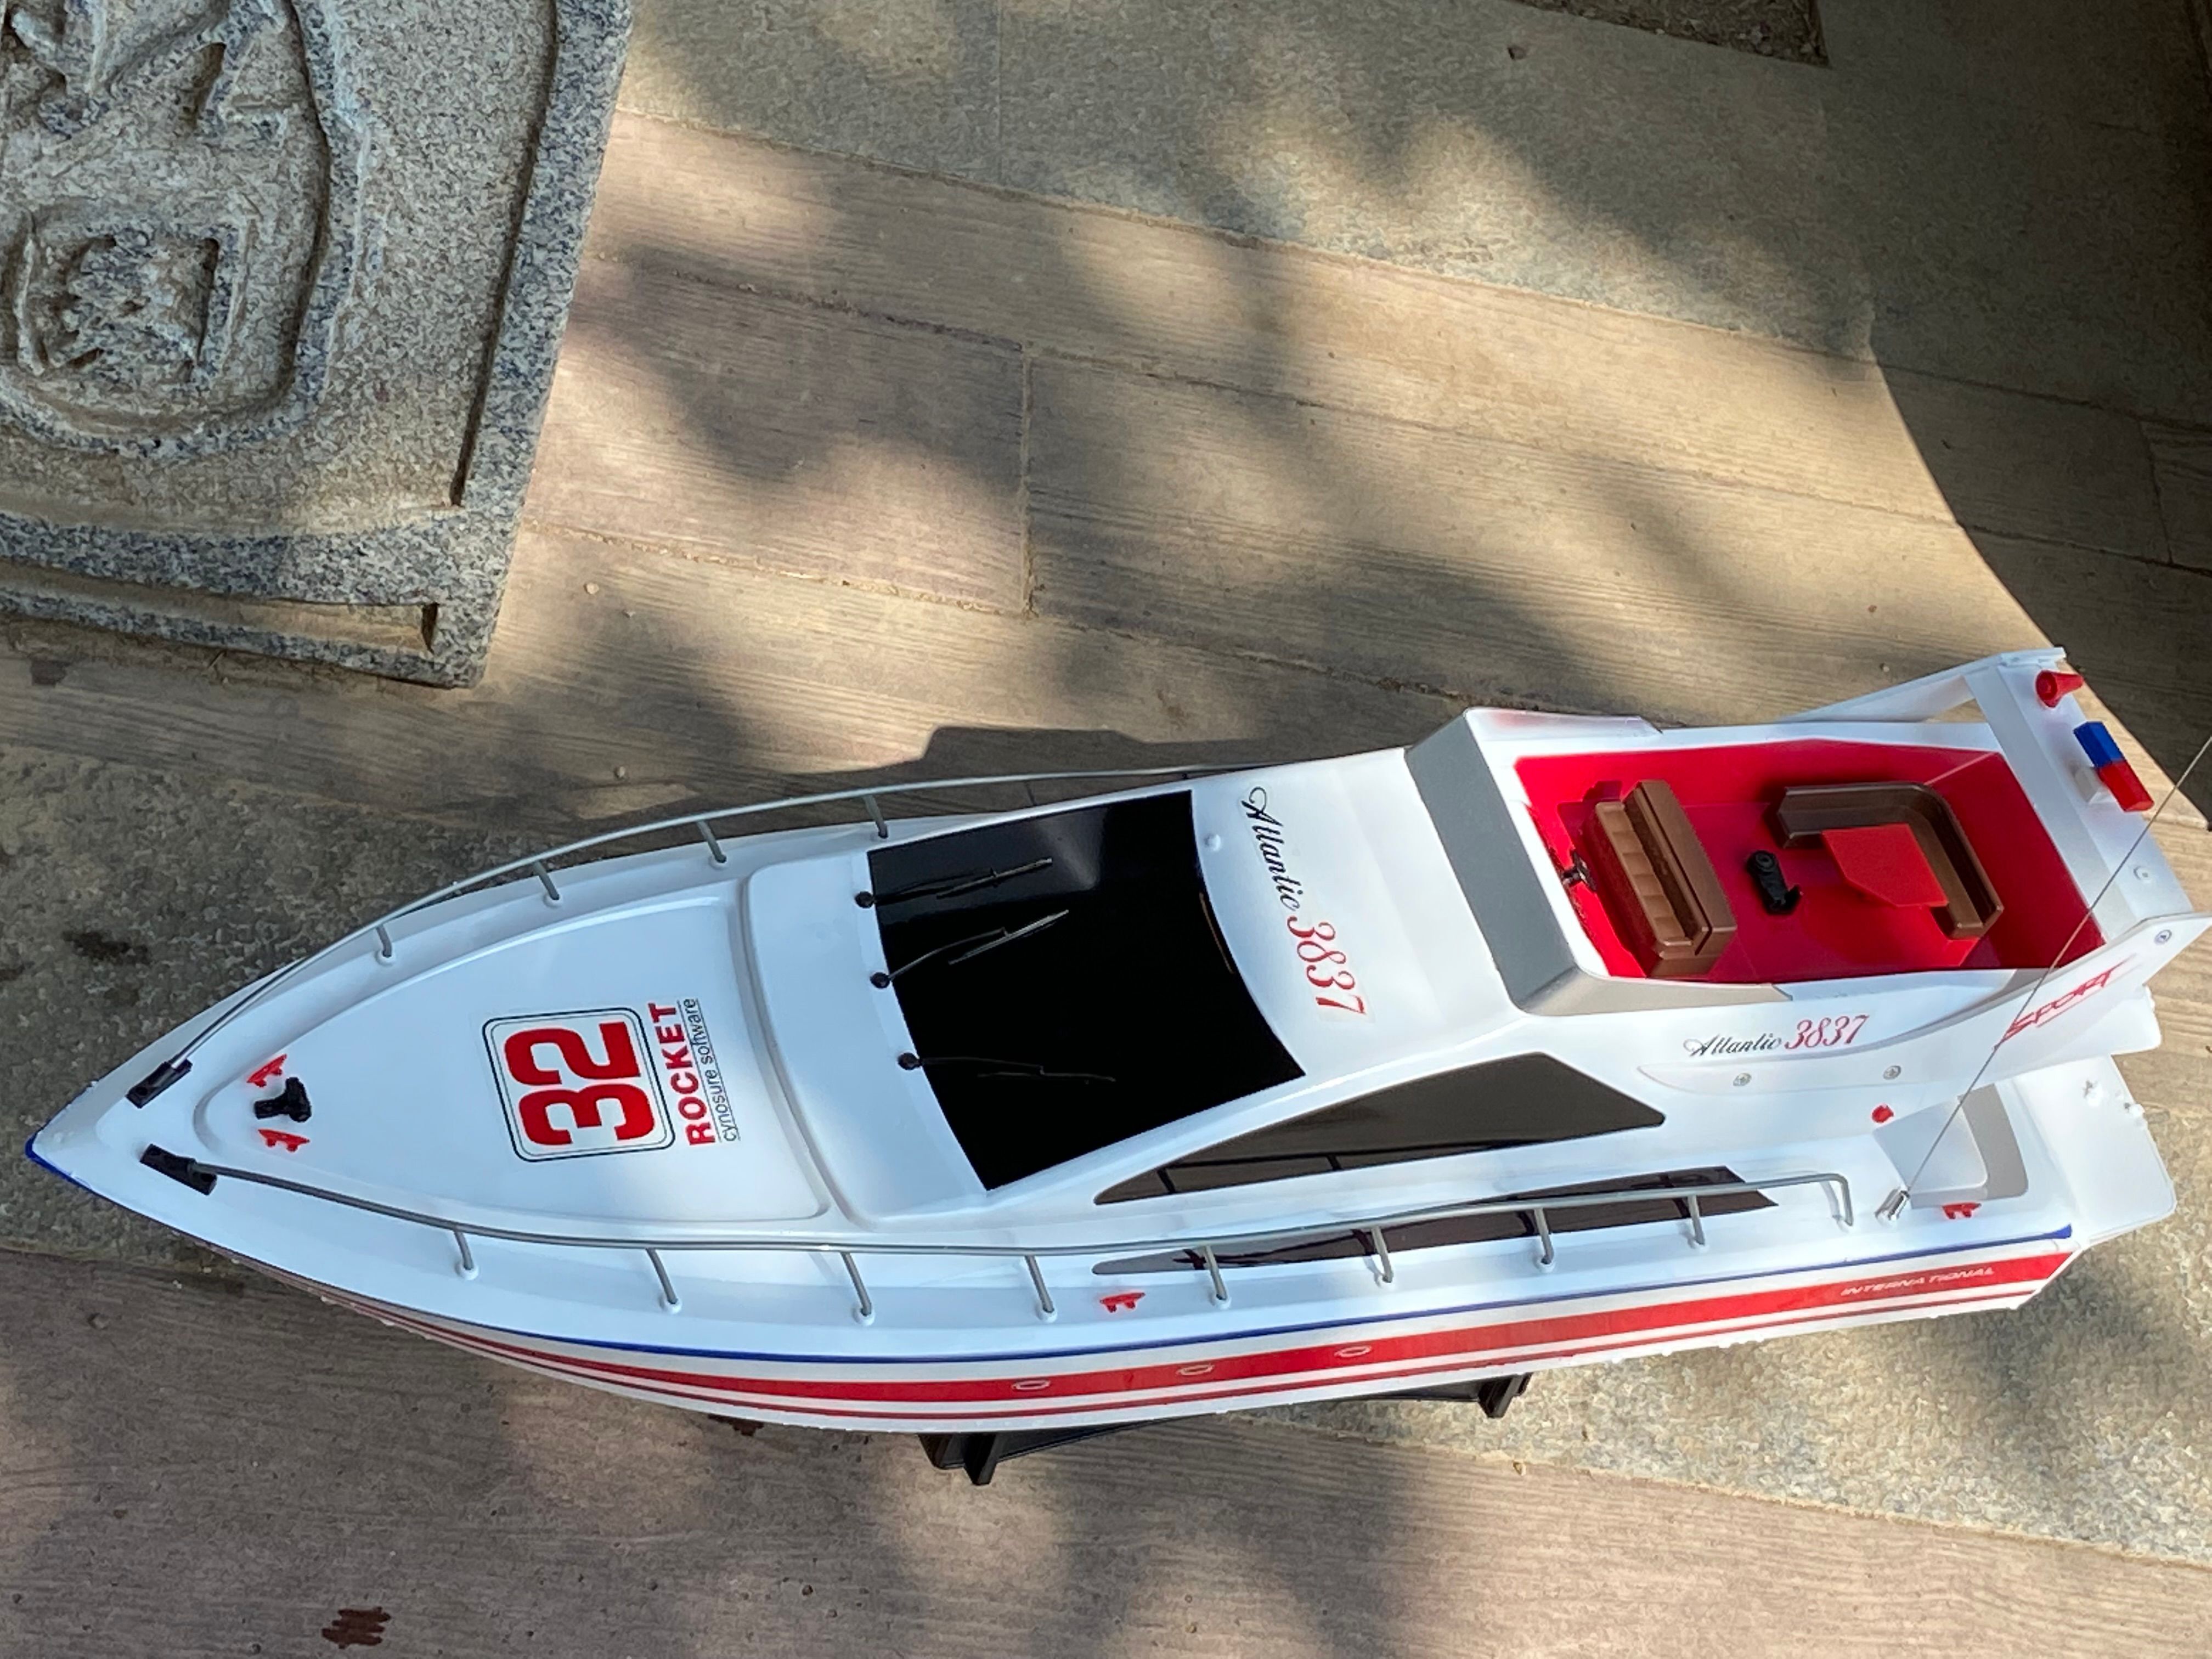 Super large remote control yacht 2.4G remote control ship model driven by two motors 70CM 27.5 inches large hull outdoor lakes